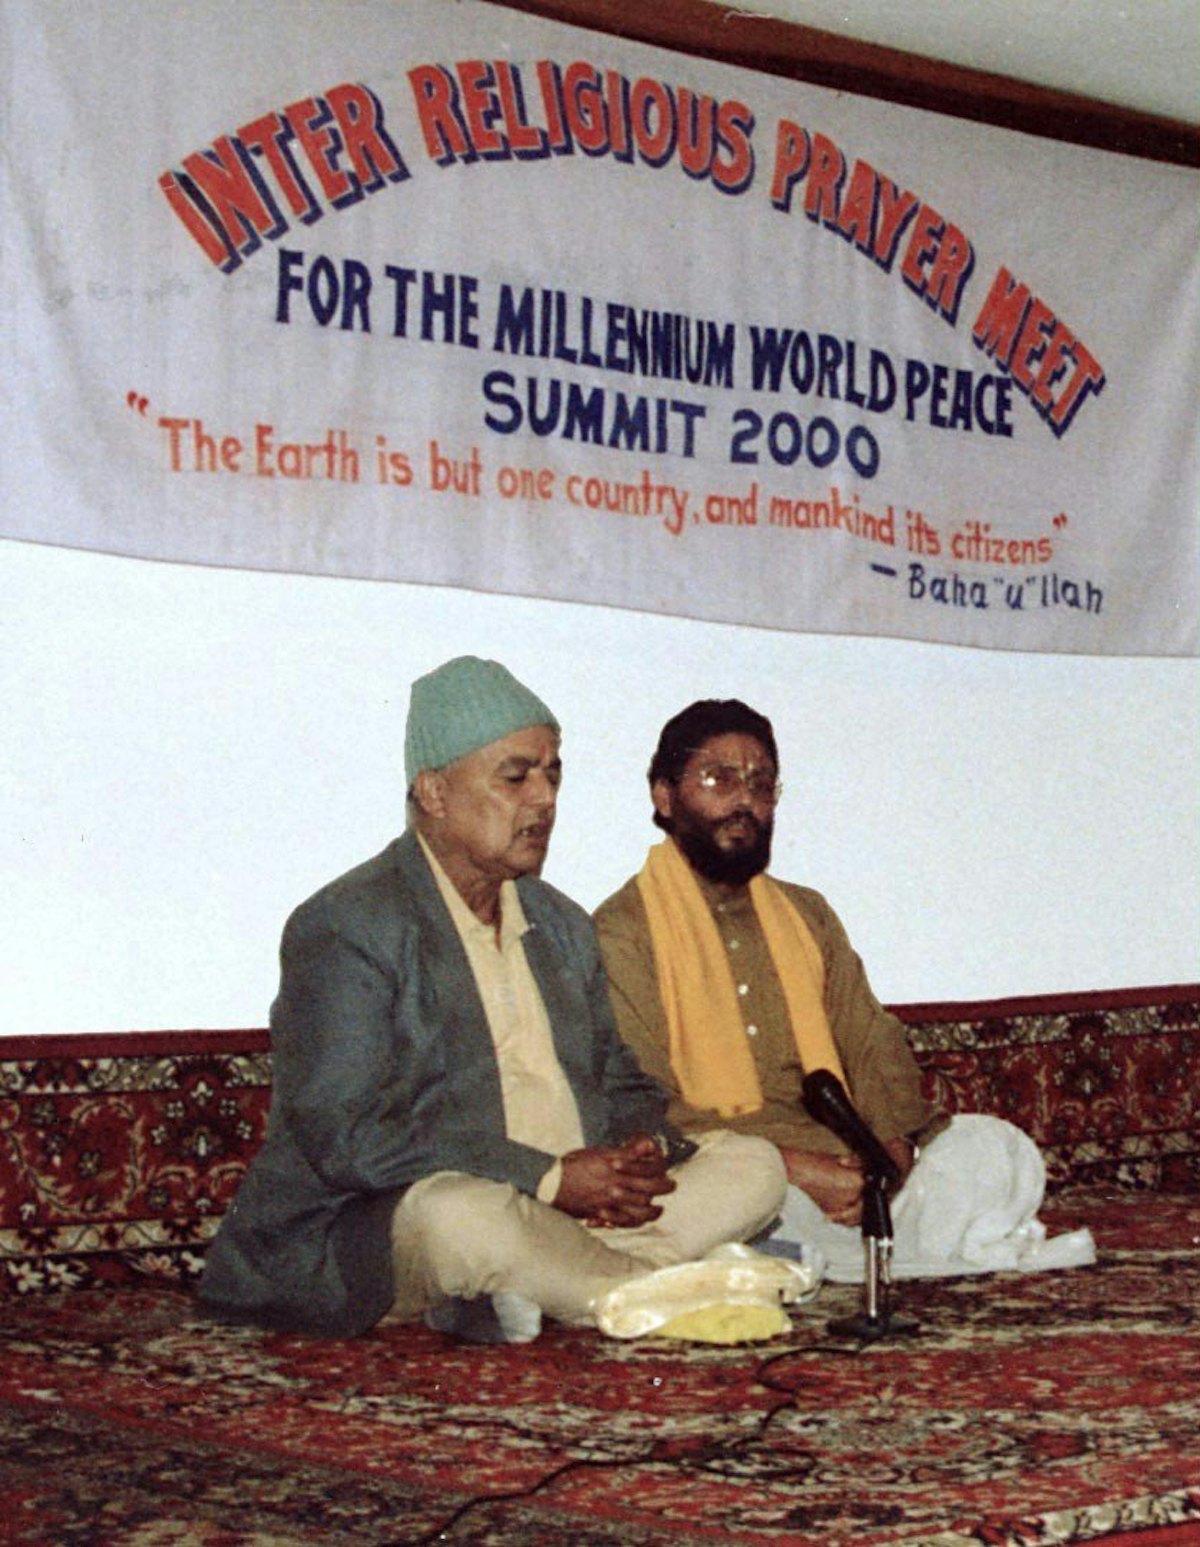 Participants offer prayers during an interfaith meeting organized by the State Baha’i Council of Sikkim, India, on 28 August 2000 to mark the opening of the United Nations Millennium World Peace Summit of Religious and Spiritual Leaders.